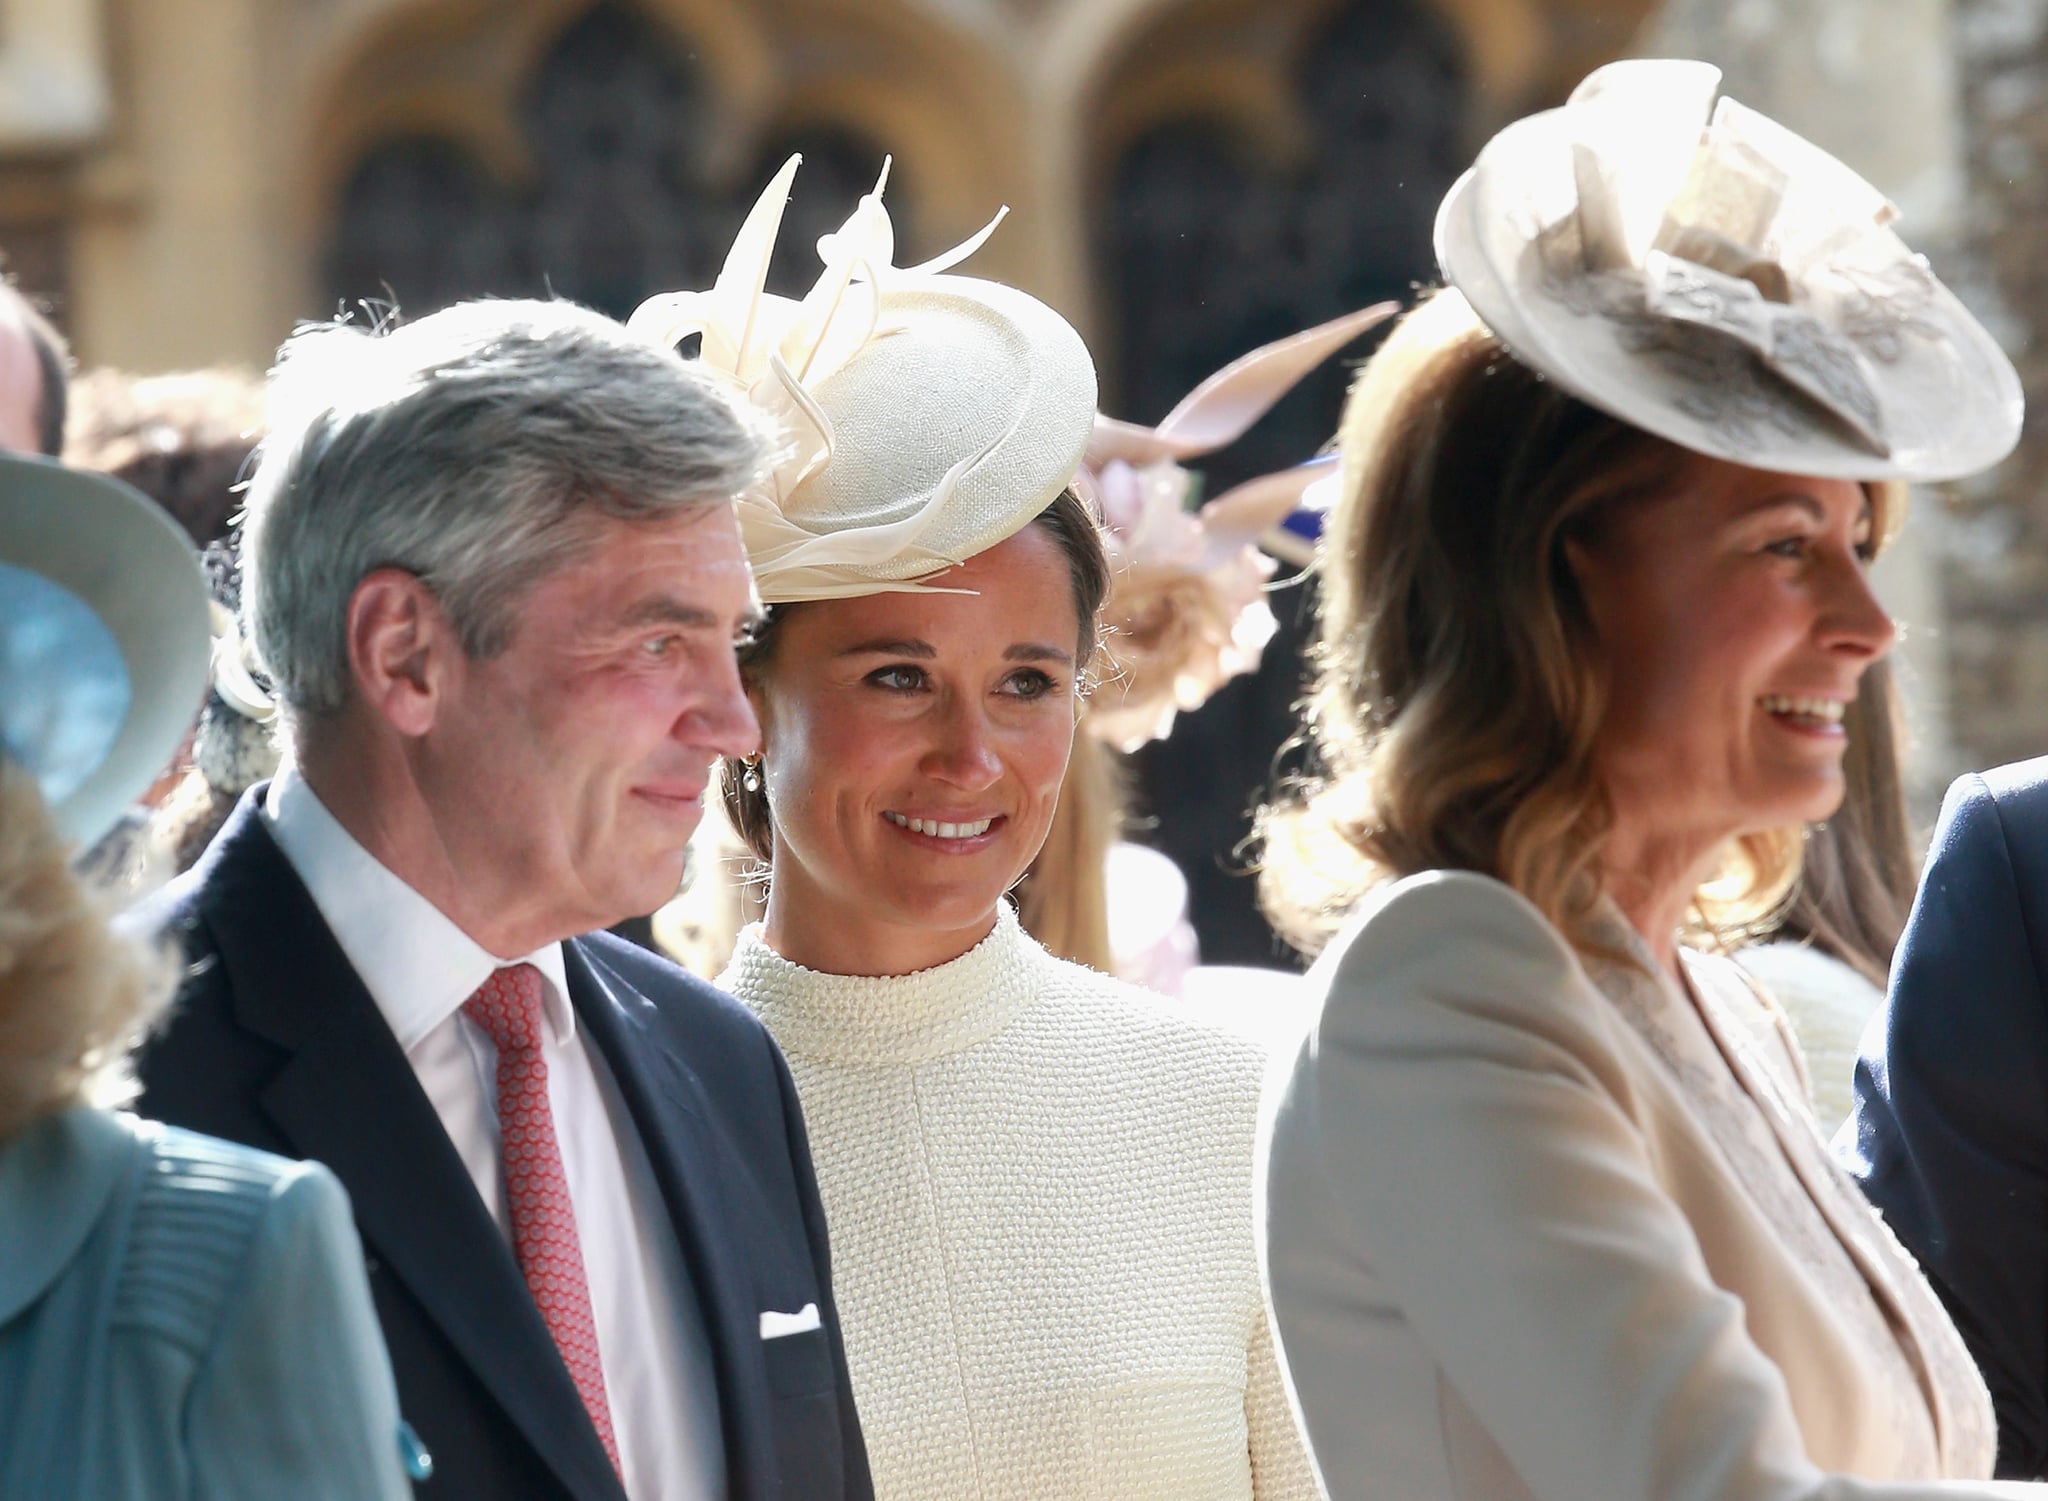 KING'S LYNN, ENGLAND - JULY 05:  Michael Middleton, Carole Middleton and Pippa Middleton leave the Church of St Mary Magdalene on the Sandringham Estate for the Christening of Princess Charlotte of Cambridge on July 5, 2015 in King's Lynn, England.  (Photo by Chris Jackson/Getty Images)